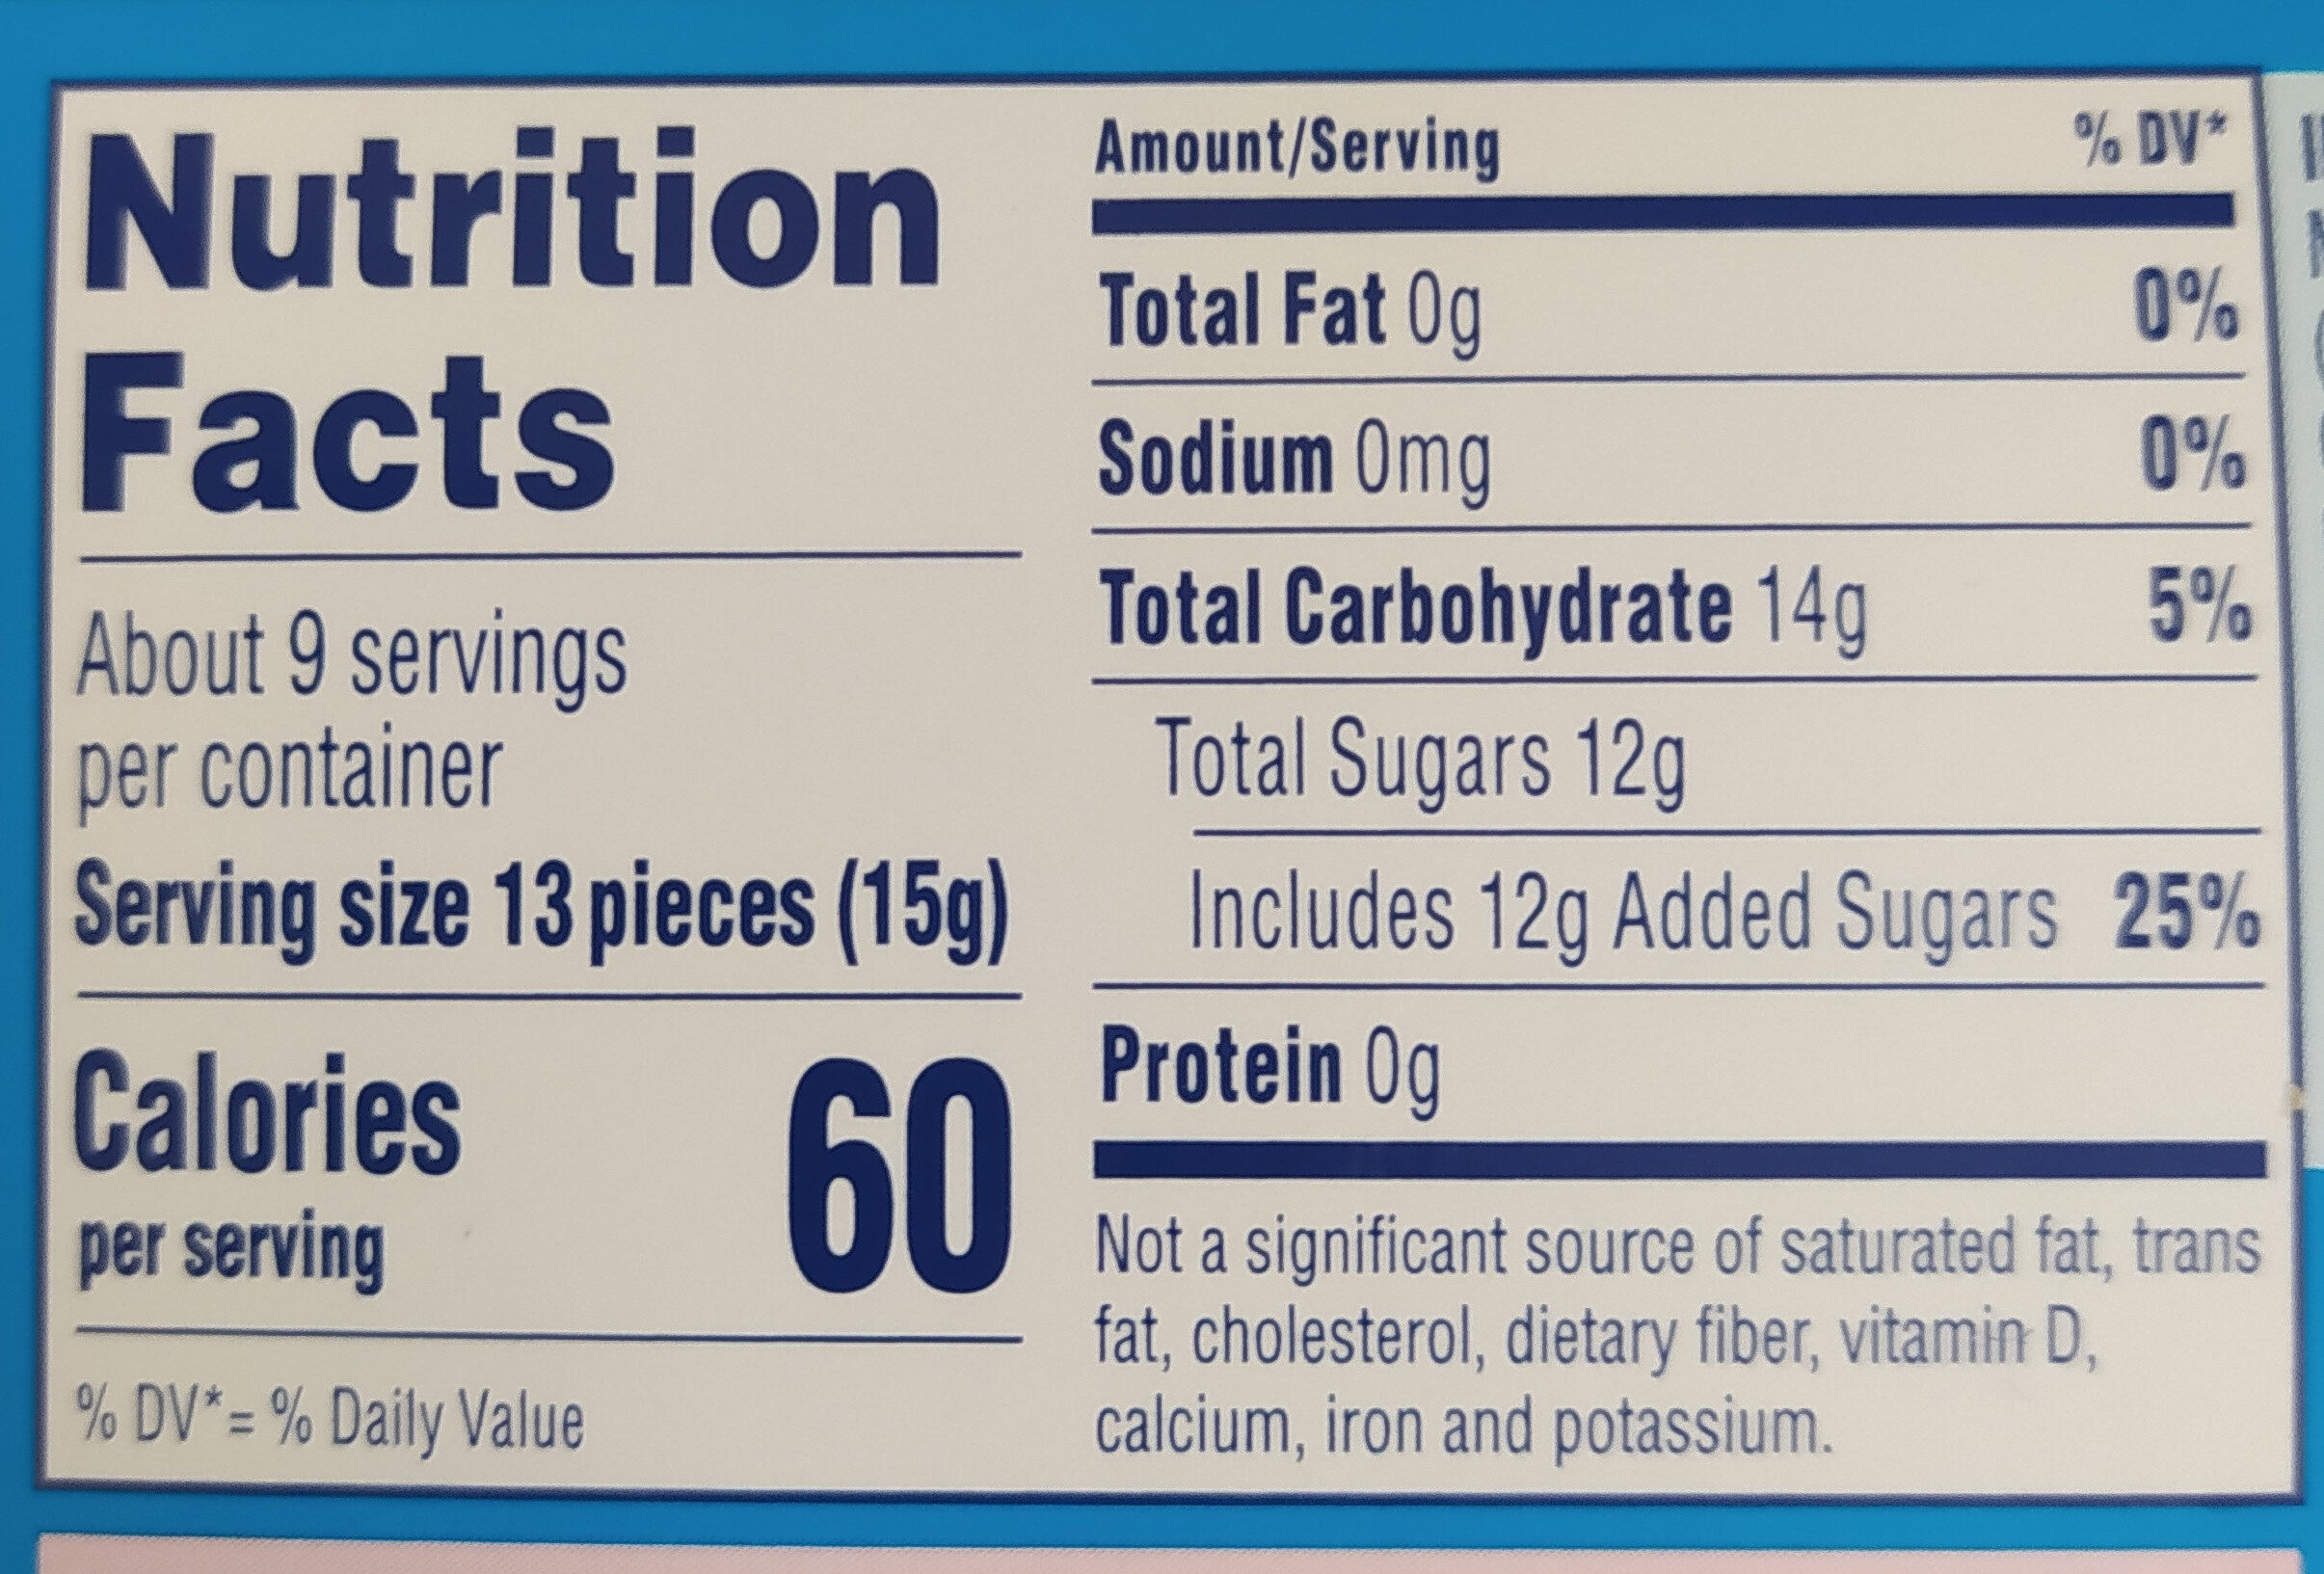 Candy theater box - Nutrition facts